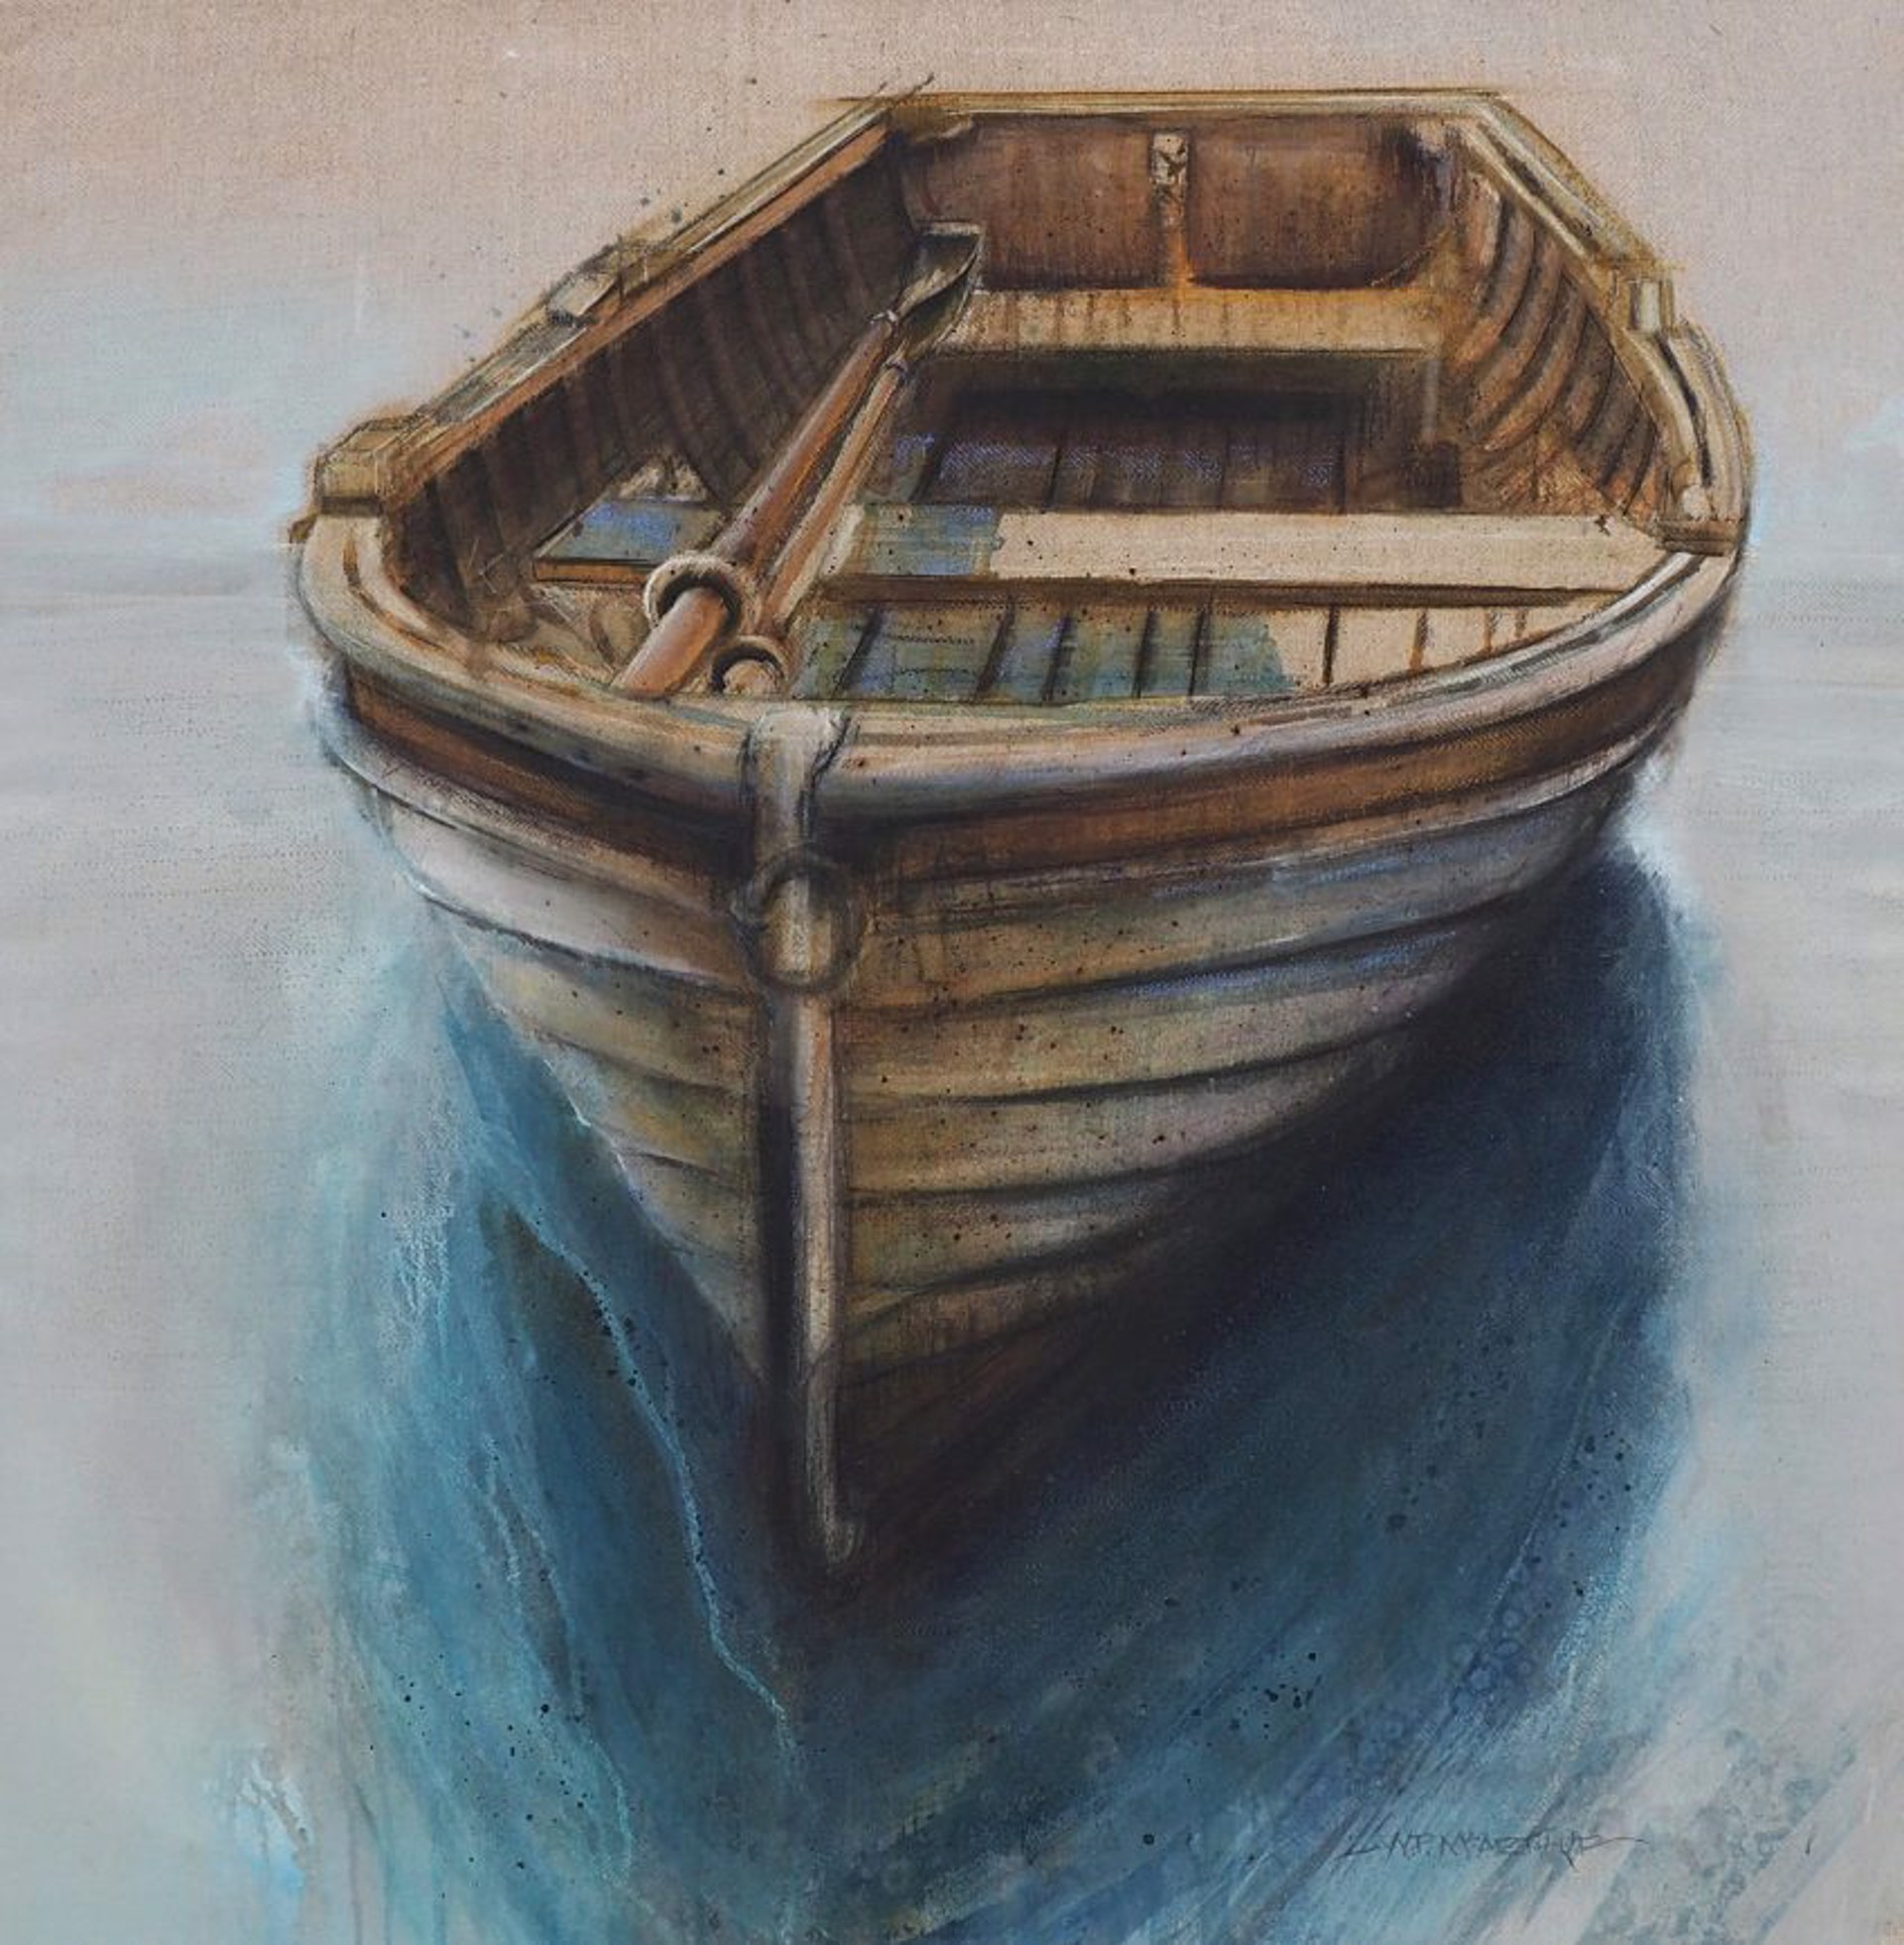 Let's Row away You and Me to The Music of the Sea by Wendy McArthur